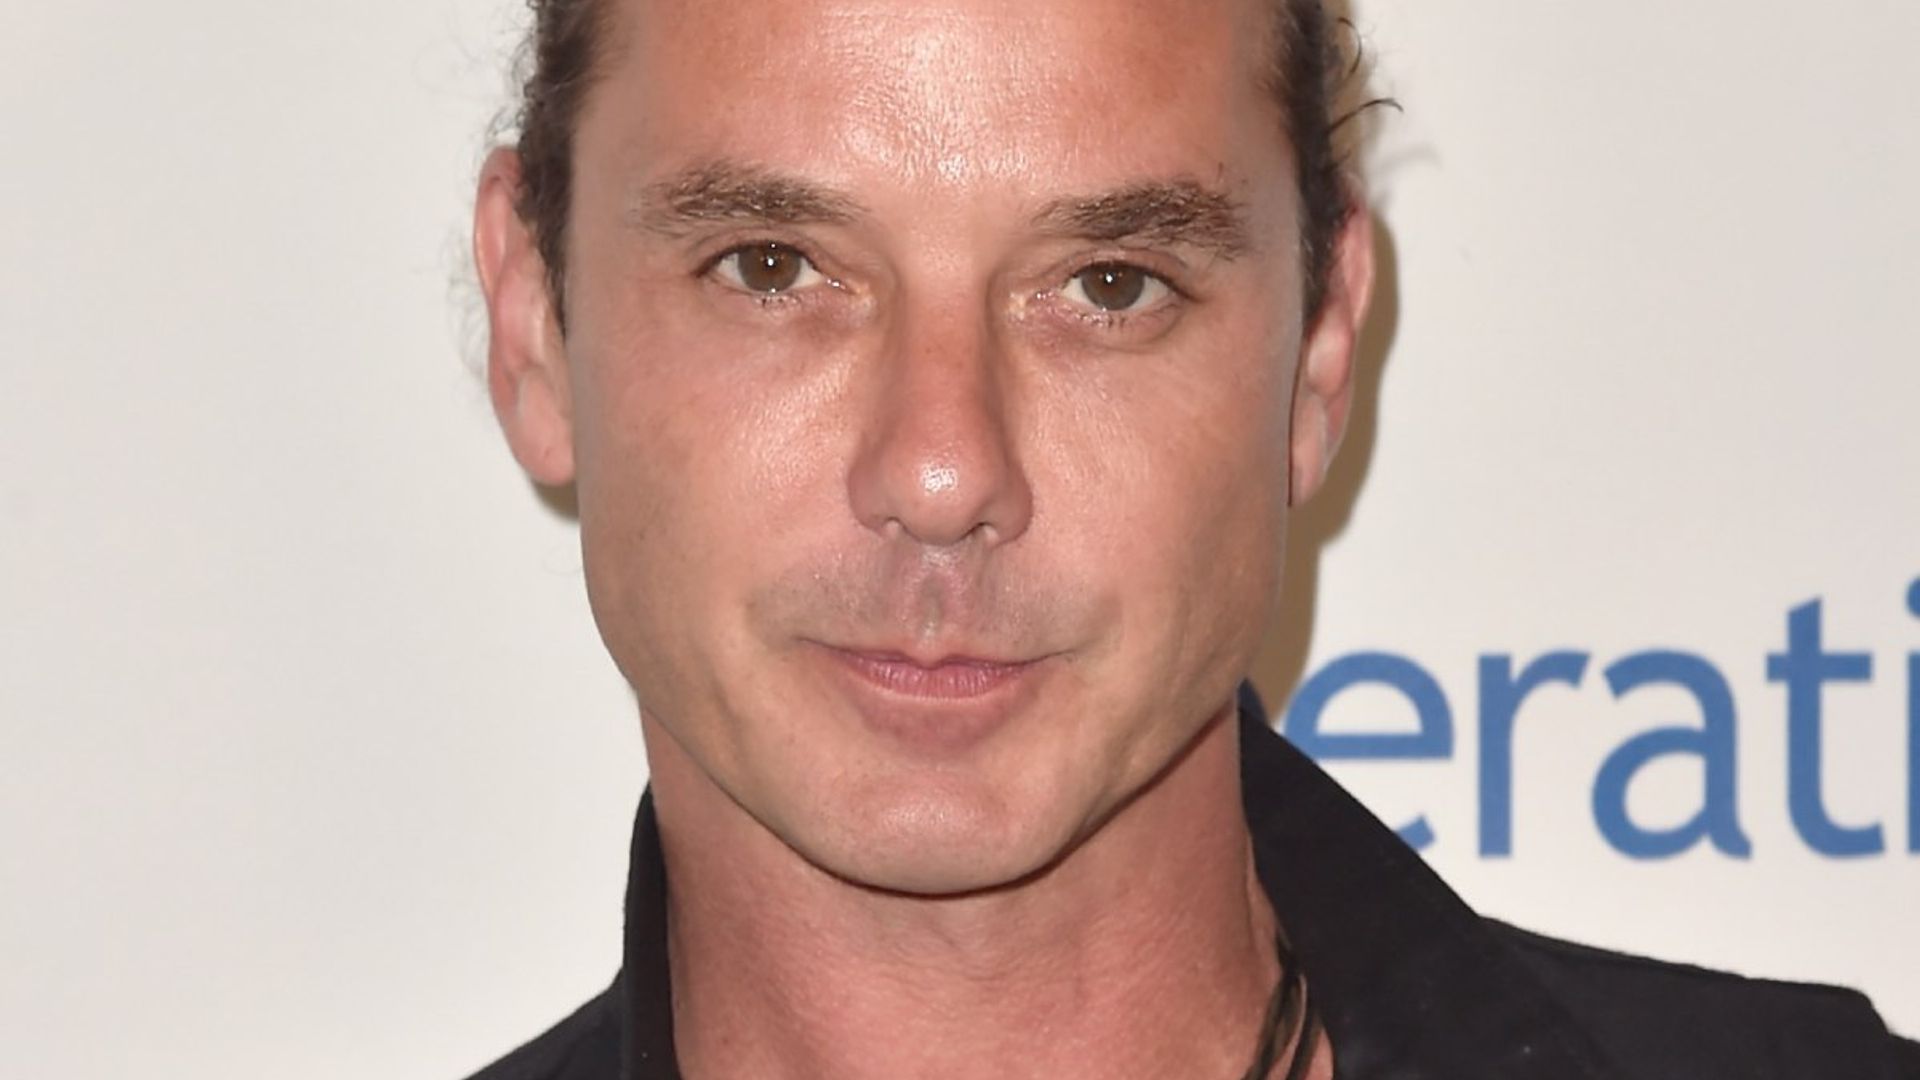 Gavin Rossdale pays heartfelt tribute to daughter Daisy Lowe ahead of her baby's arrival